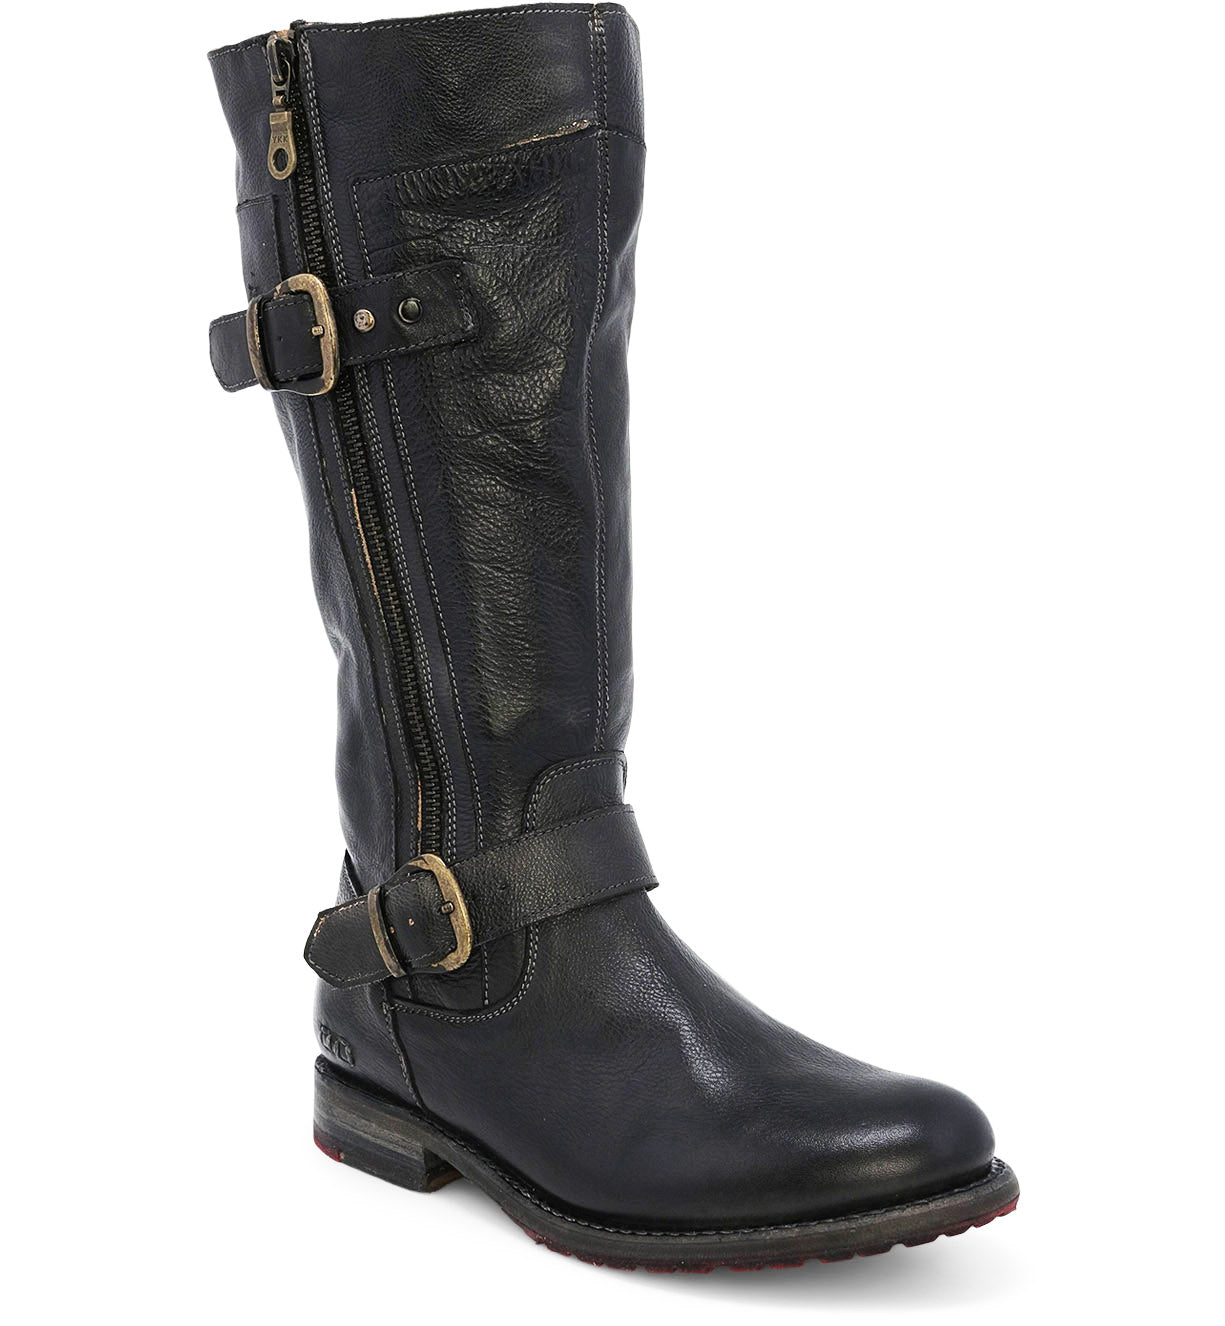 A women's black Gogo Lug Wide Calf boot with Bed Stu buckles and buckles.